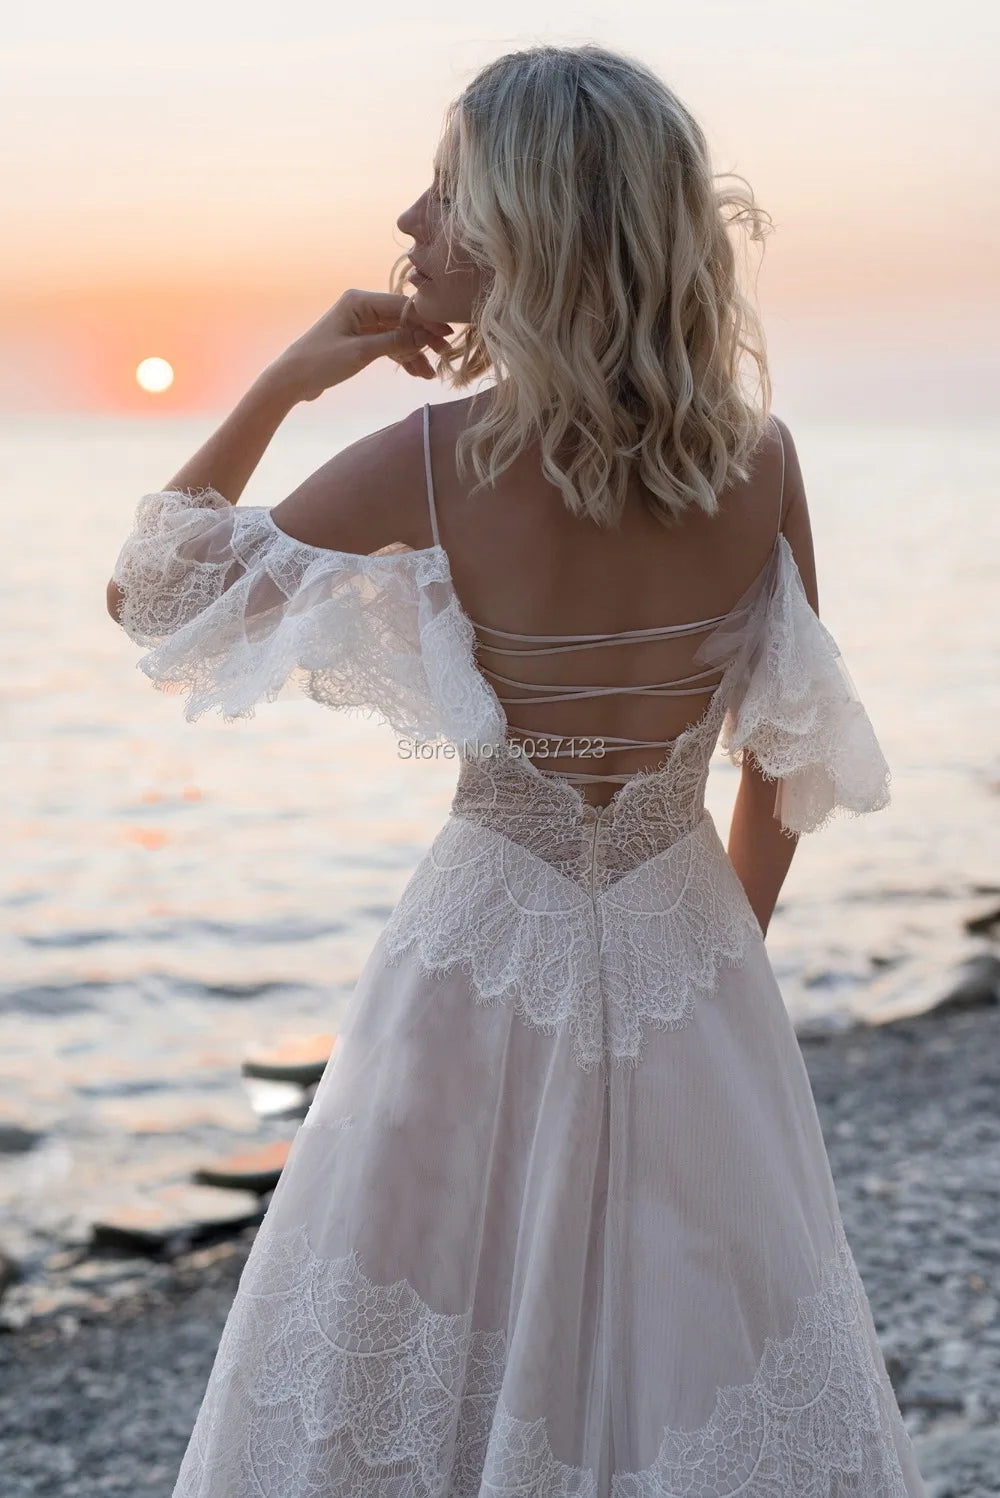 Bohemian Wedding Dresses Tempting Nude Champagne V Neck Chic Sleeves Straps Ruffles Lace A Line Backless Bridal Gowns